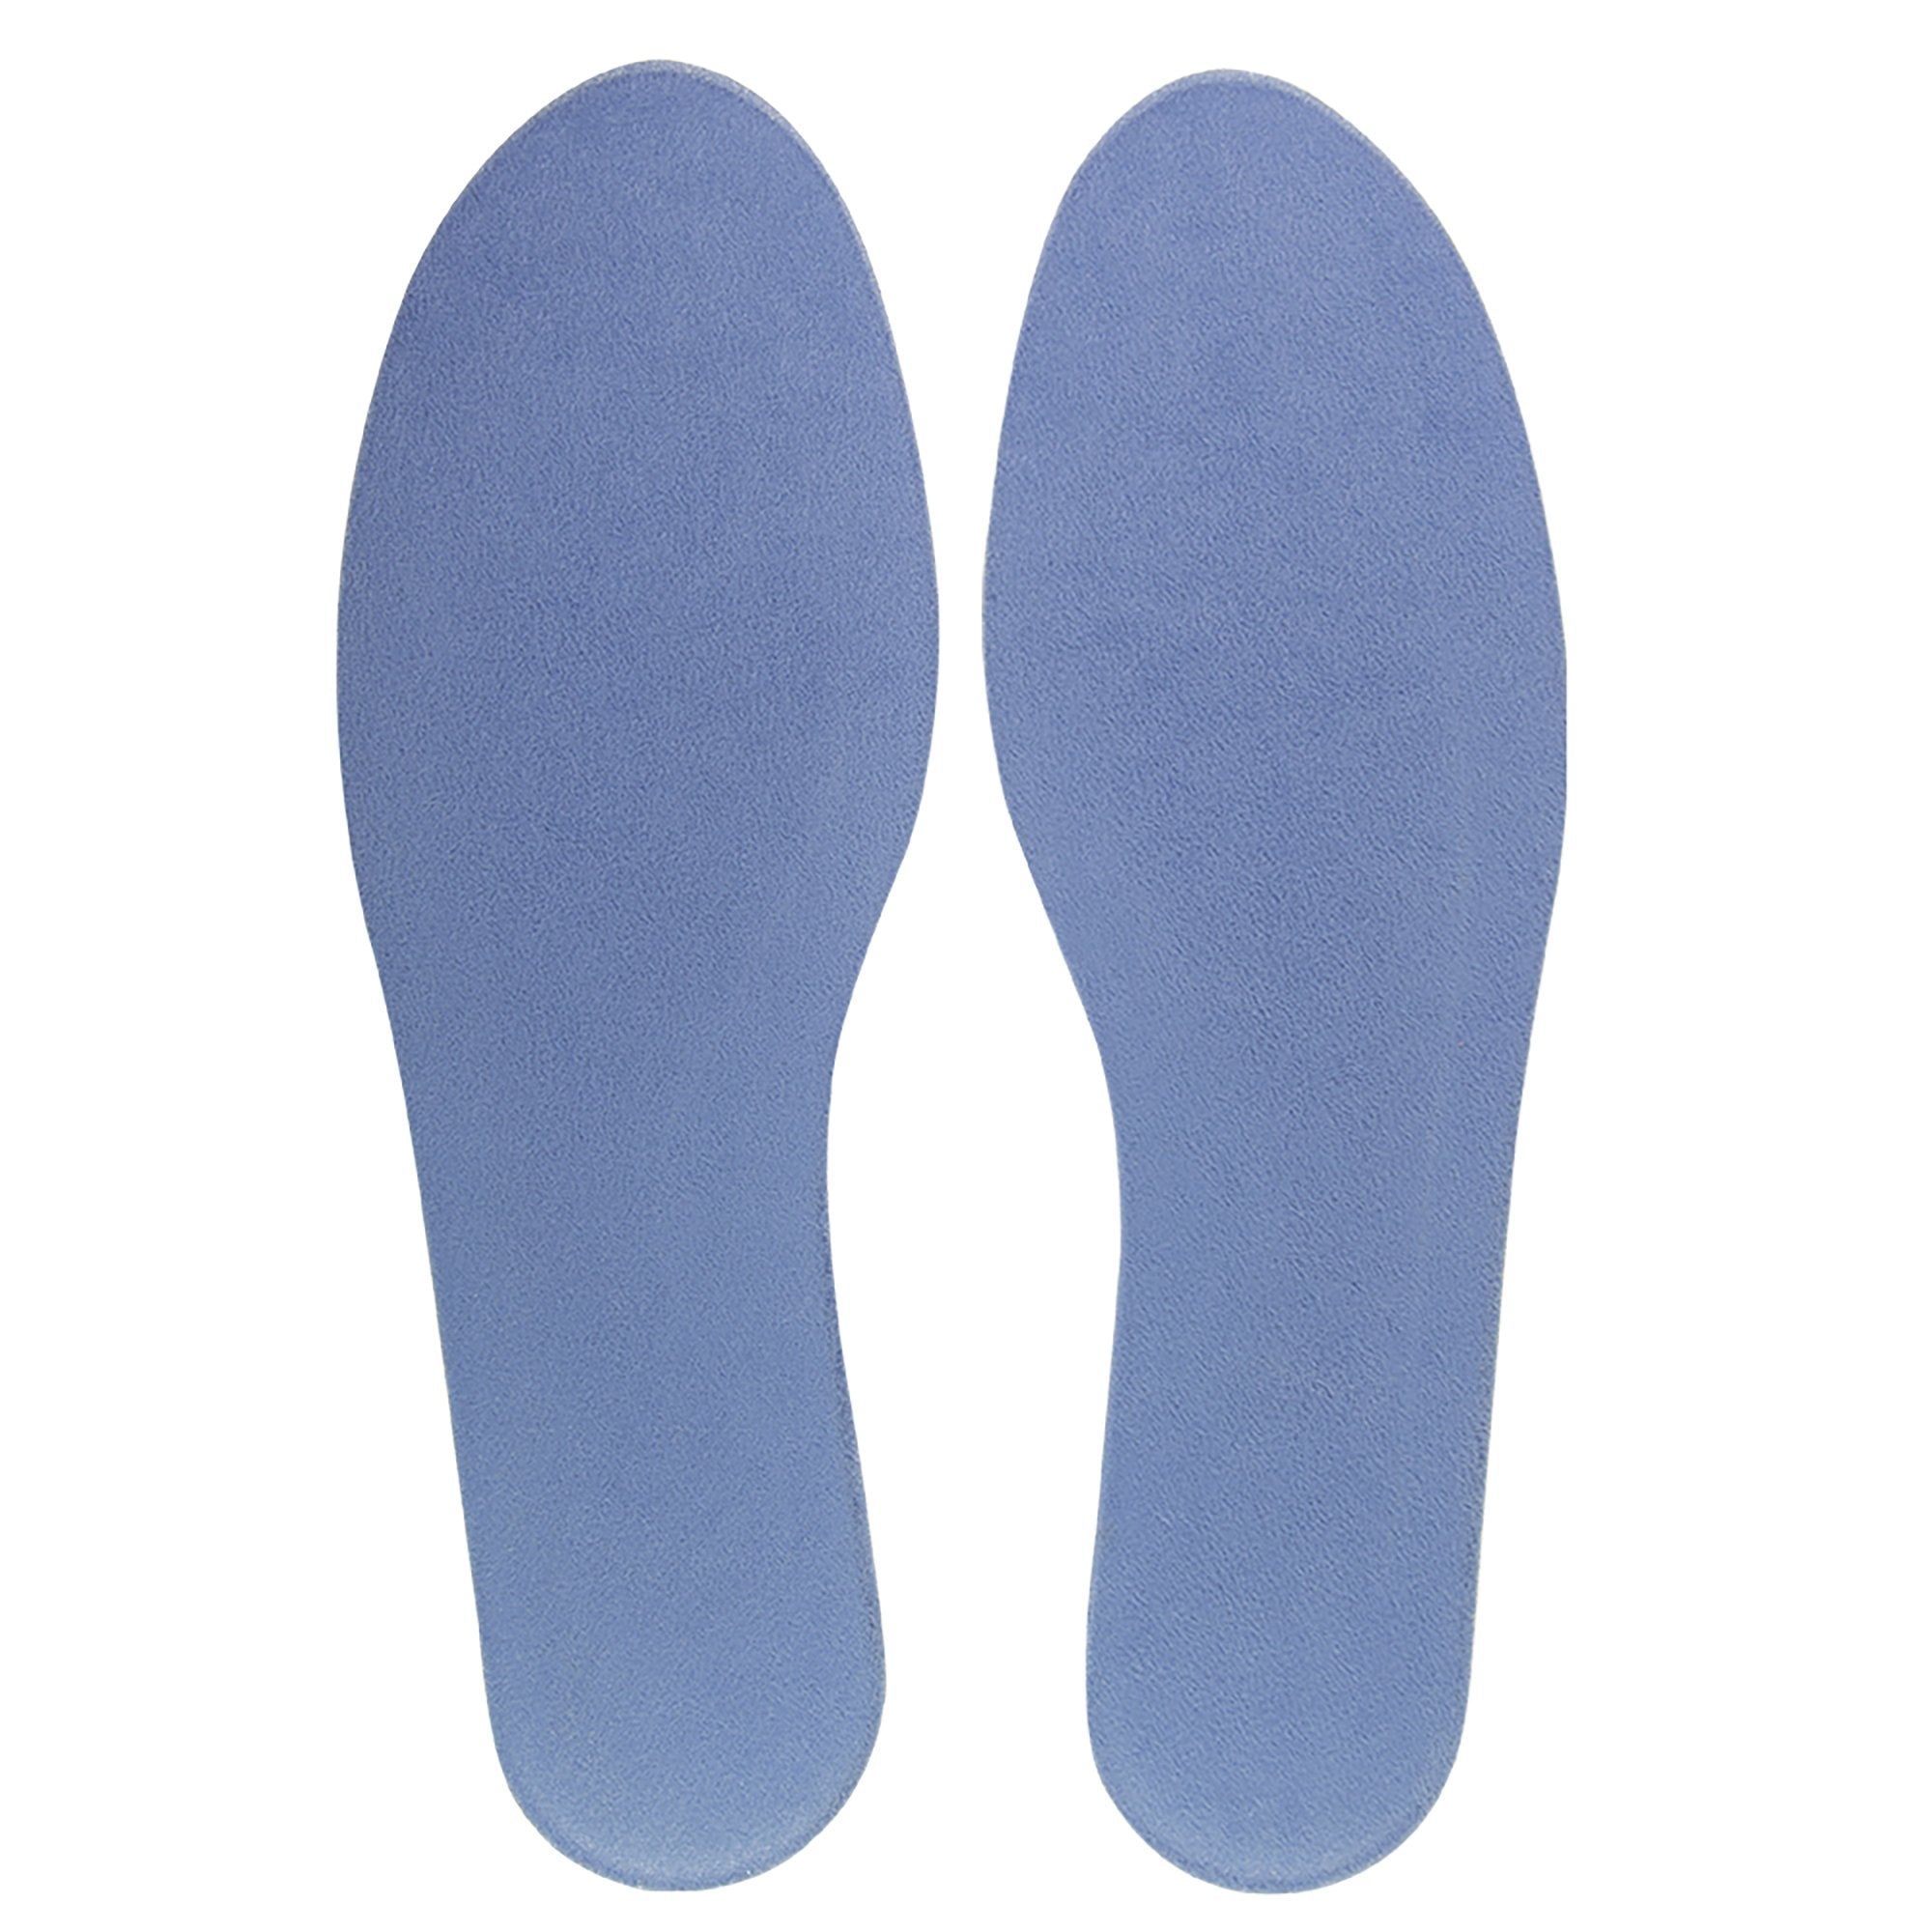 Soft Stride™ Thin Insole Insole Full Length Size B Polymer Male 6 to 8 / Female 7 to 9